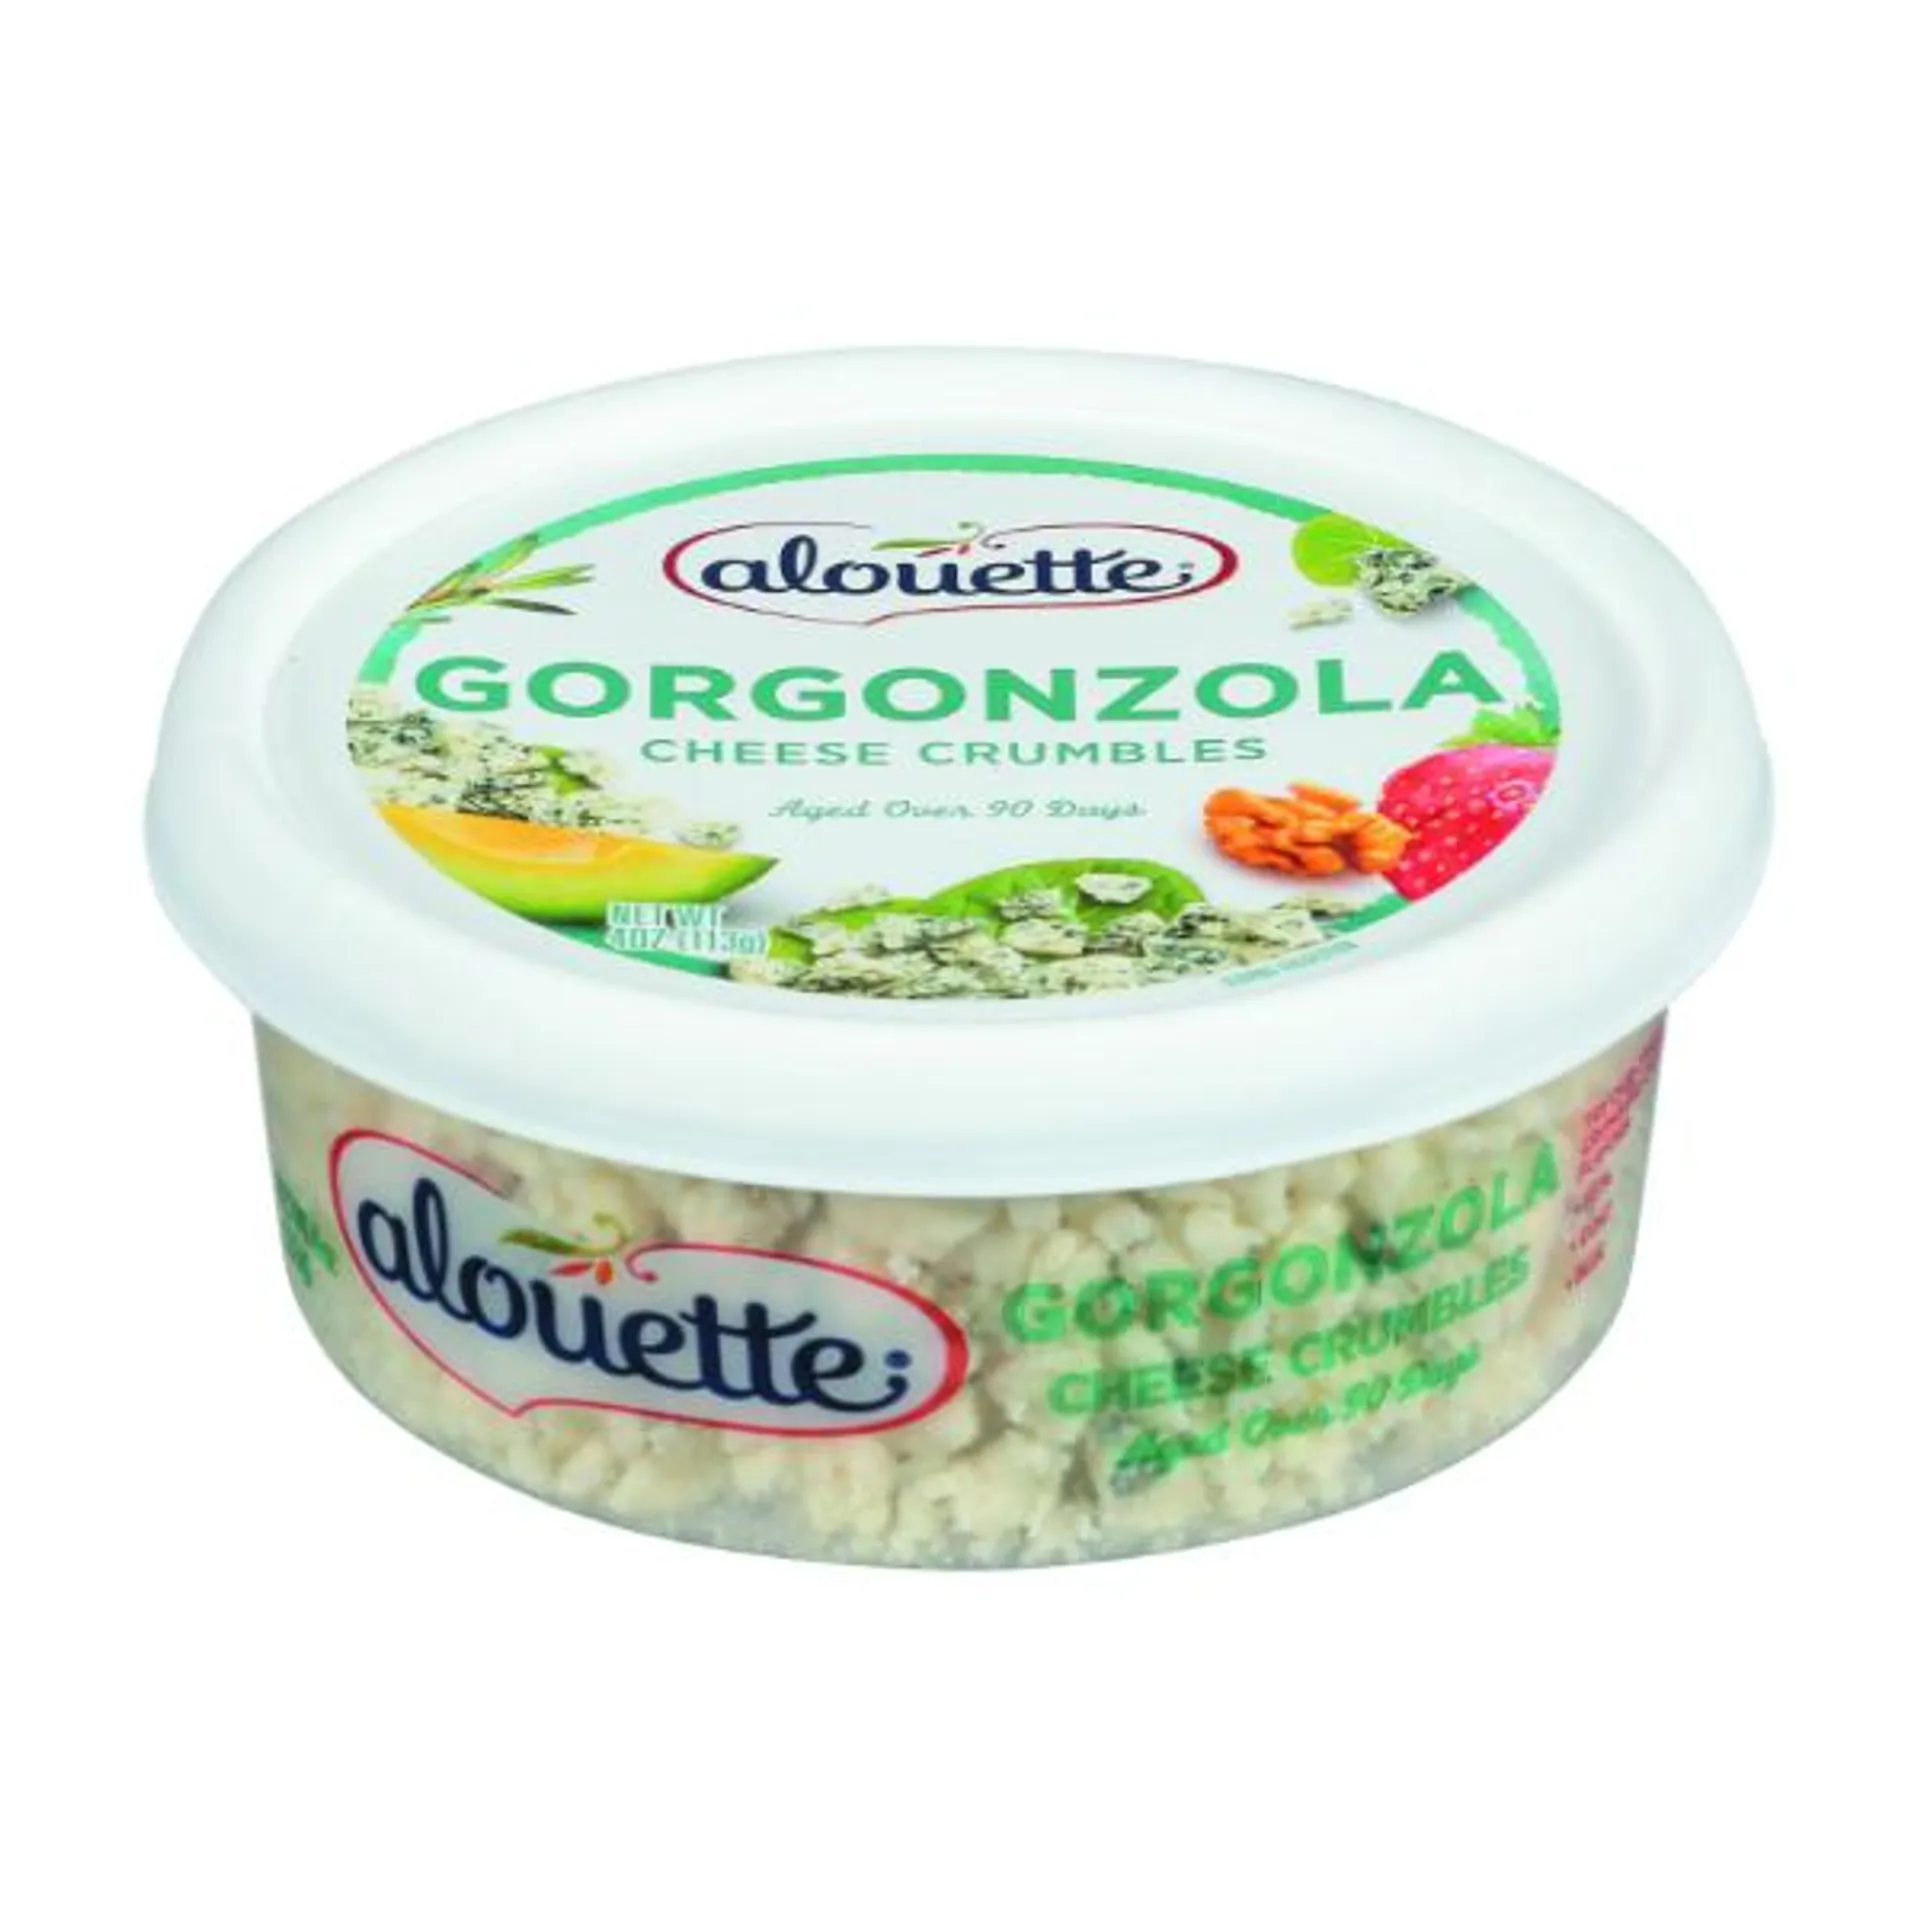 Alouette Crumbled Gorgonzola Cheese - 4 Ounce